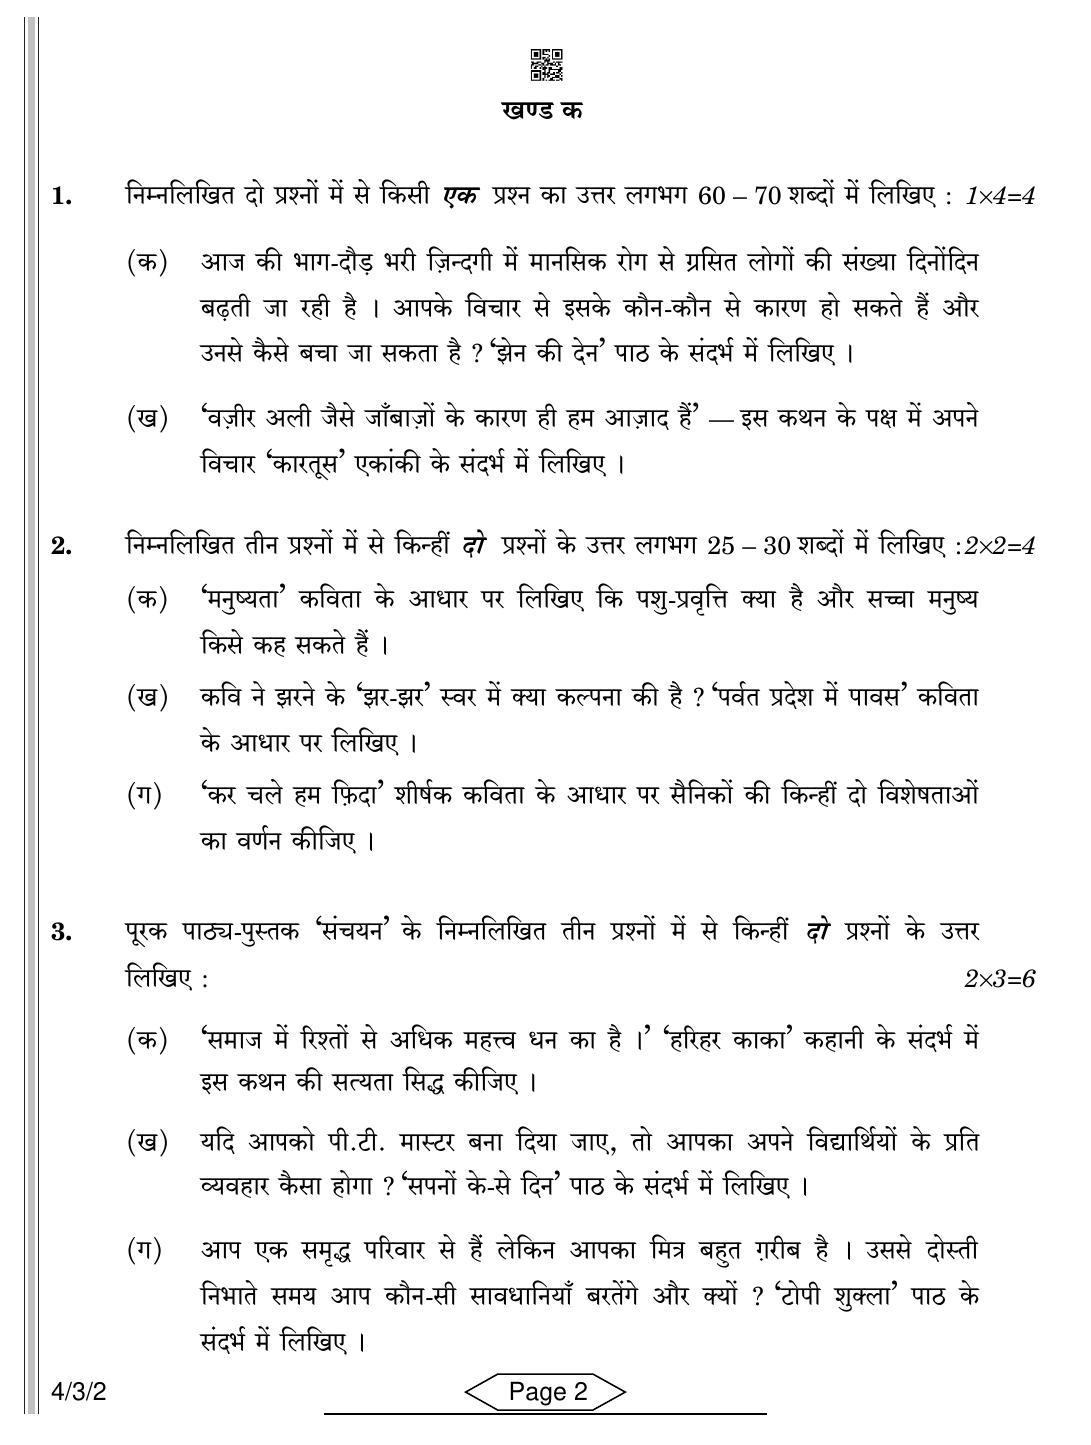 CBSE Class 10 4-3-2 Hindi B 2022 Question Paper - Page 2